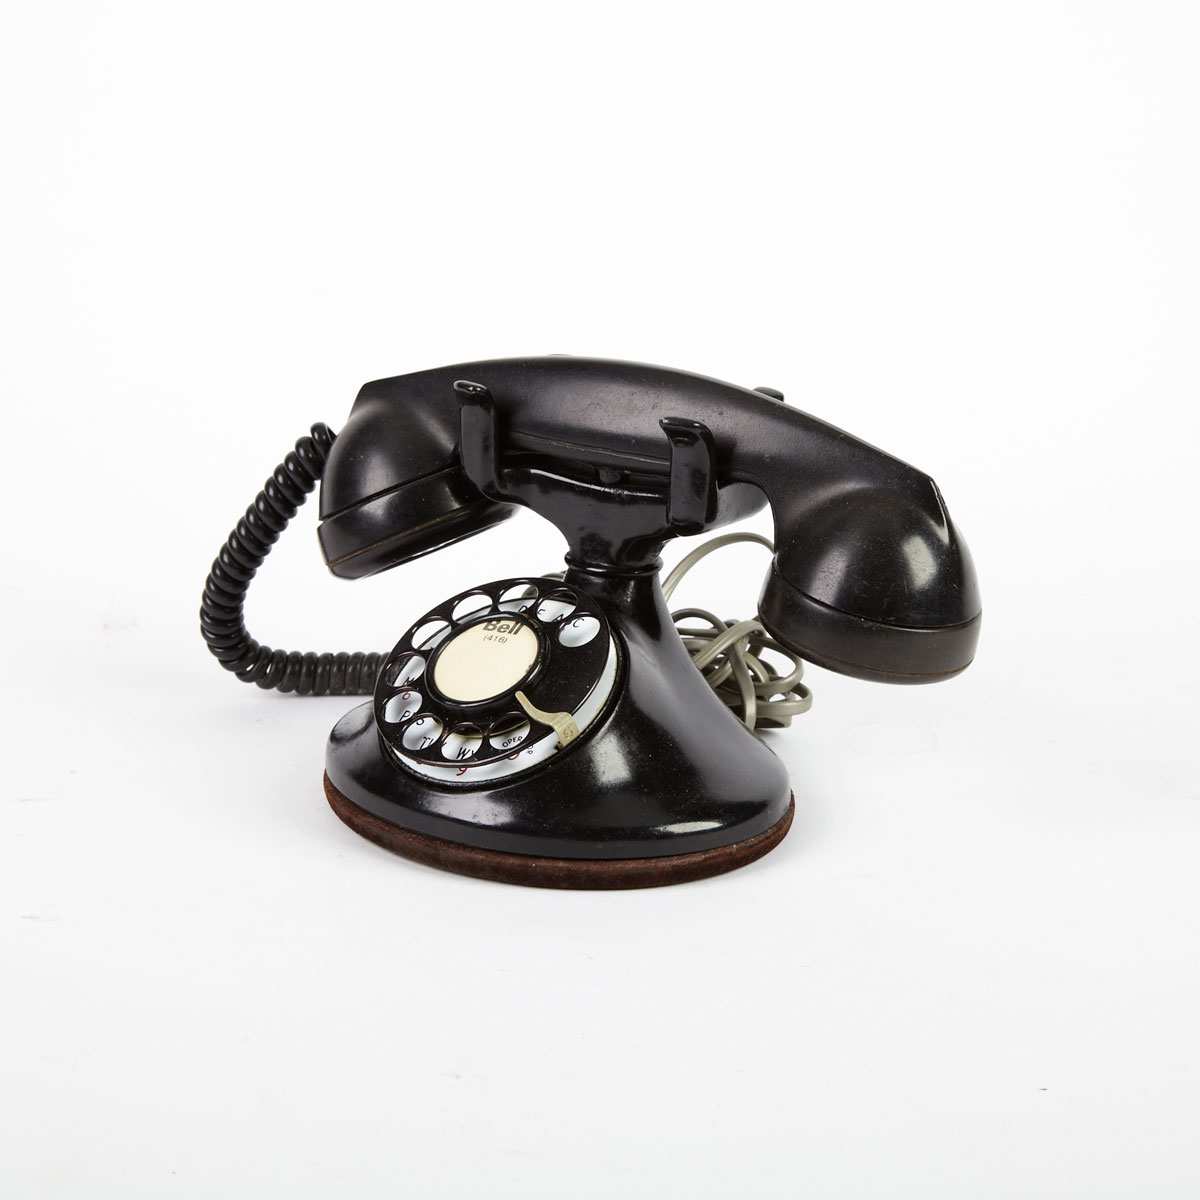 Northern Electric Rotary Dial Telephone